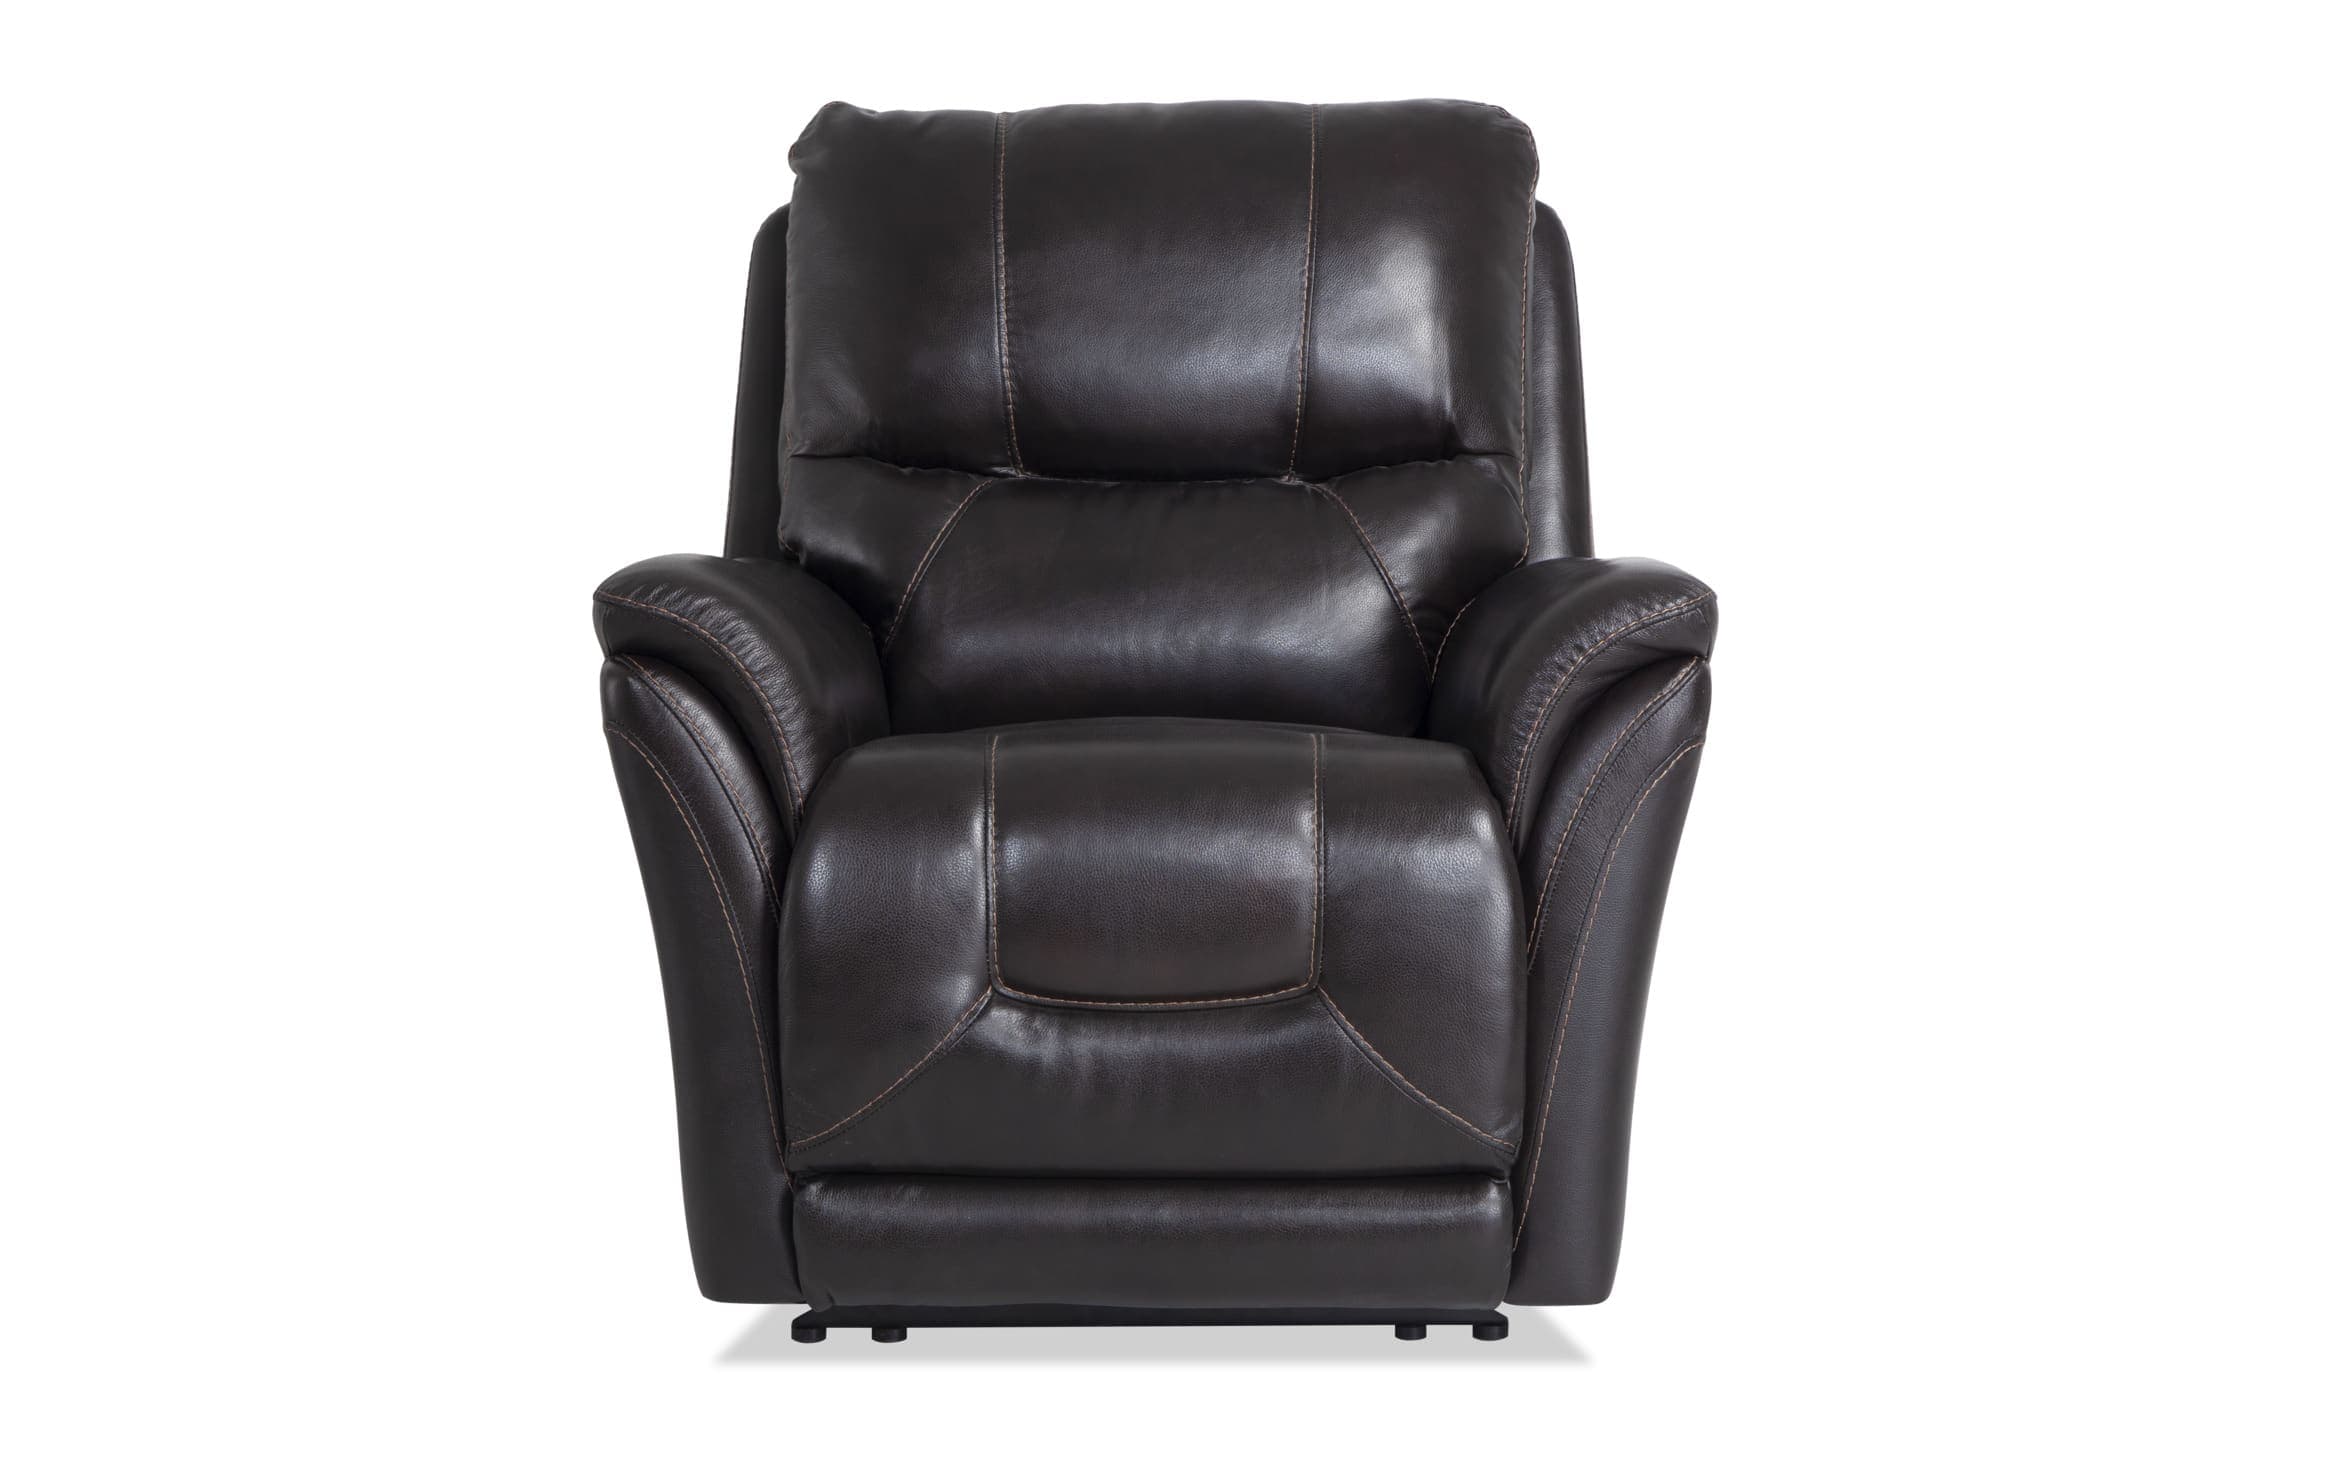 Turbo Brown Leather Power Recliner, Leather Power Recliner